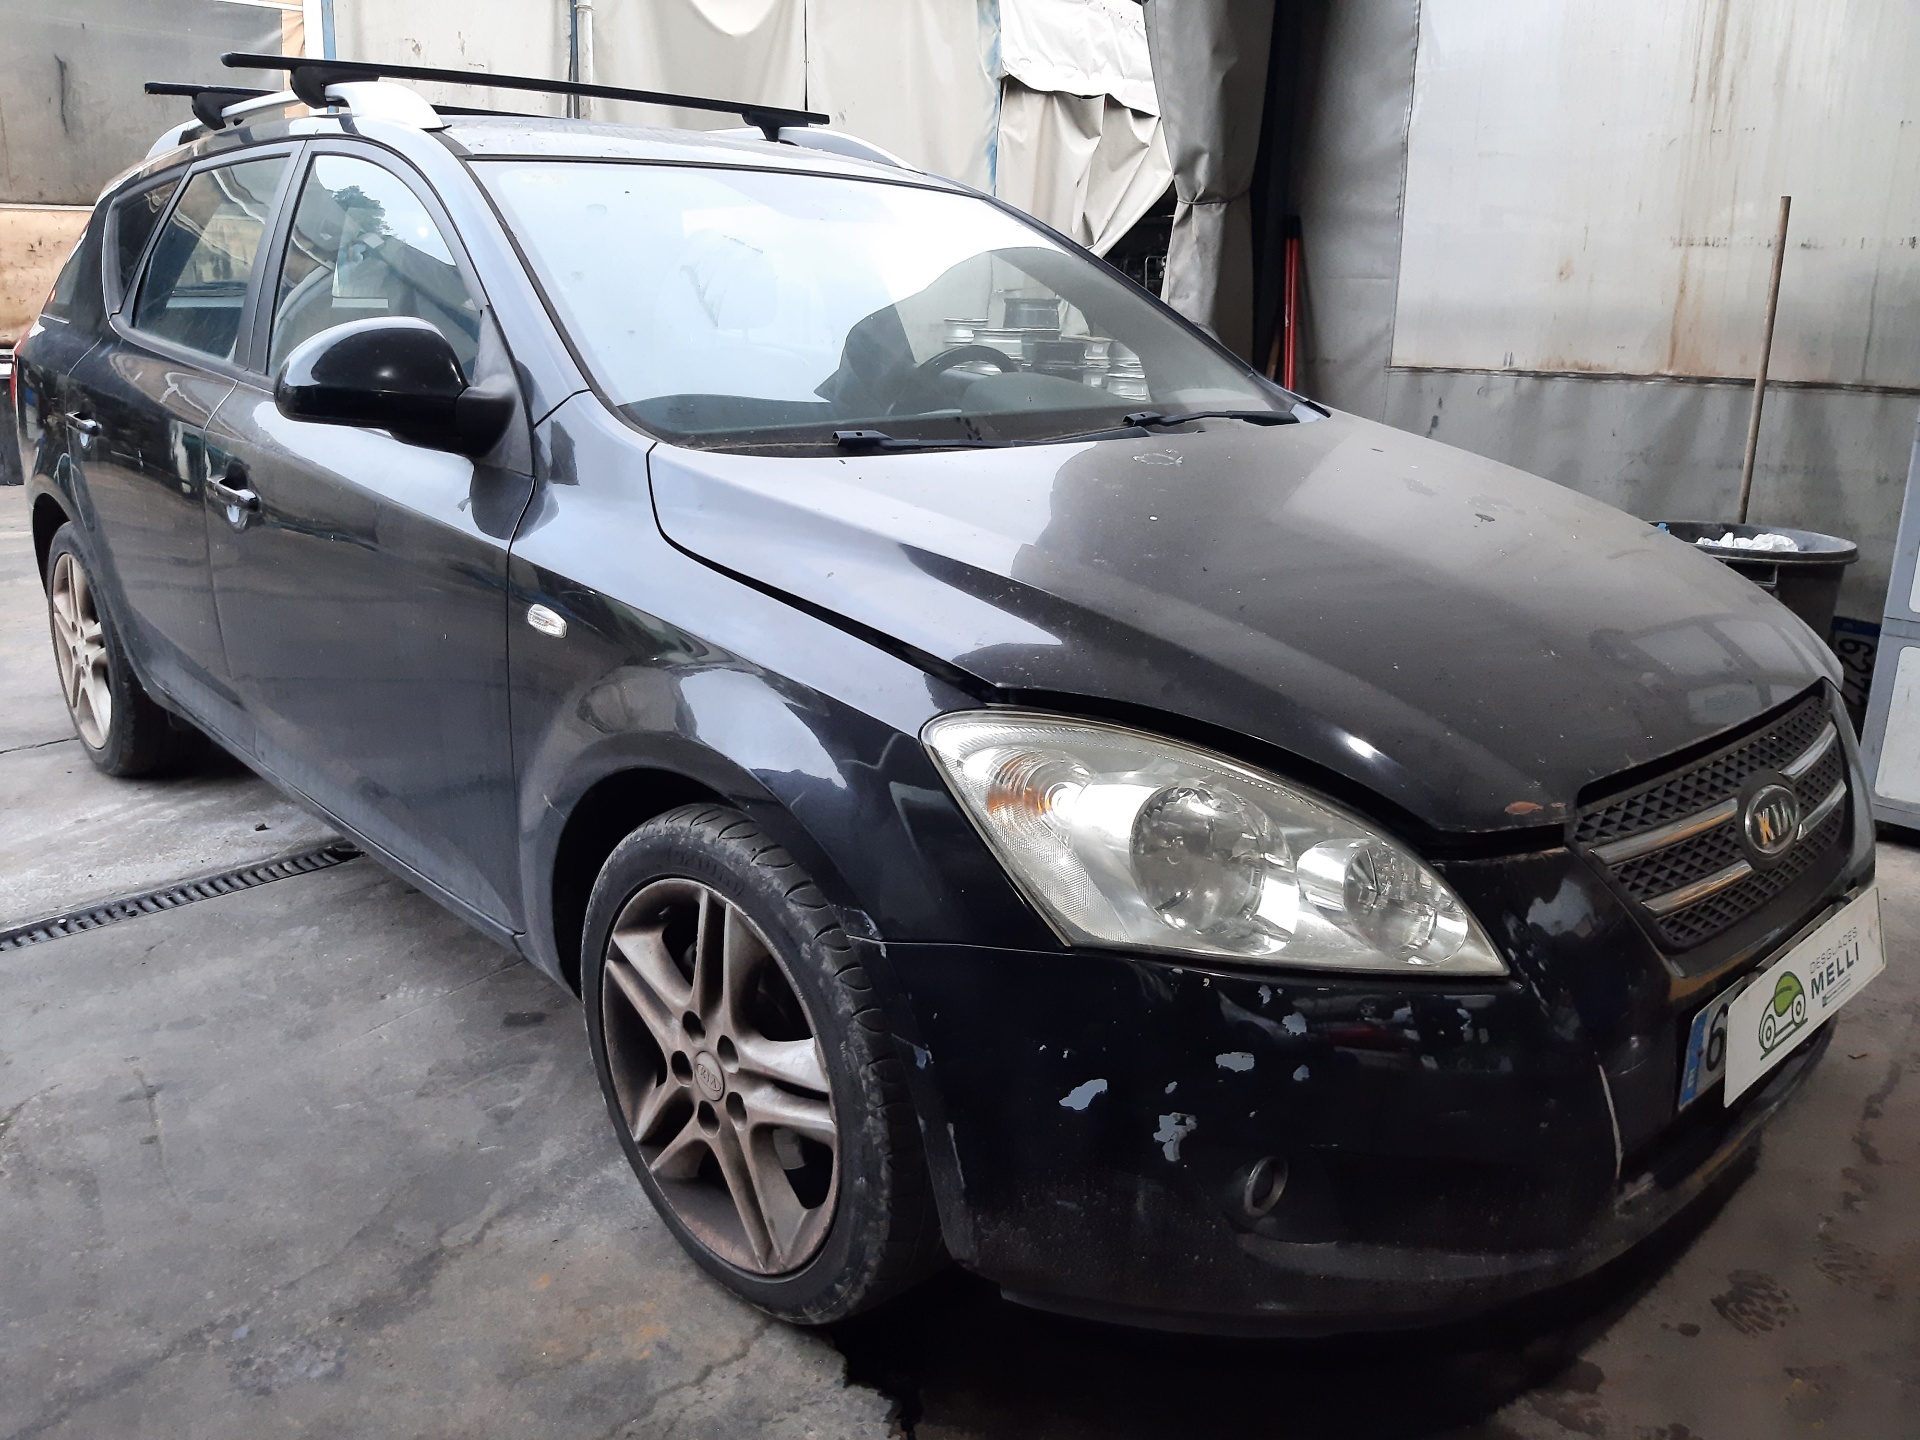 KIA Cee'd 1 generation (2007-2012) Other Interior Parts 957101H100 22817702